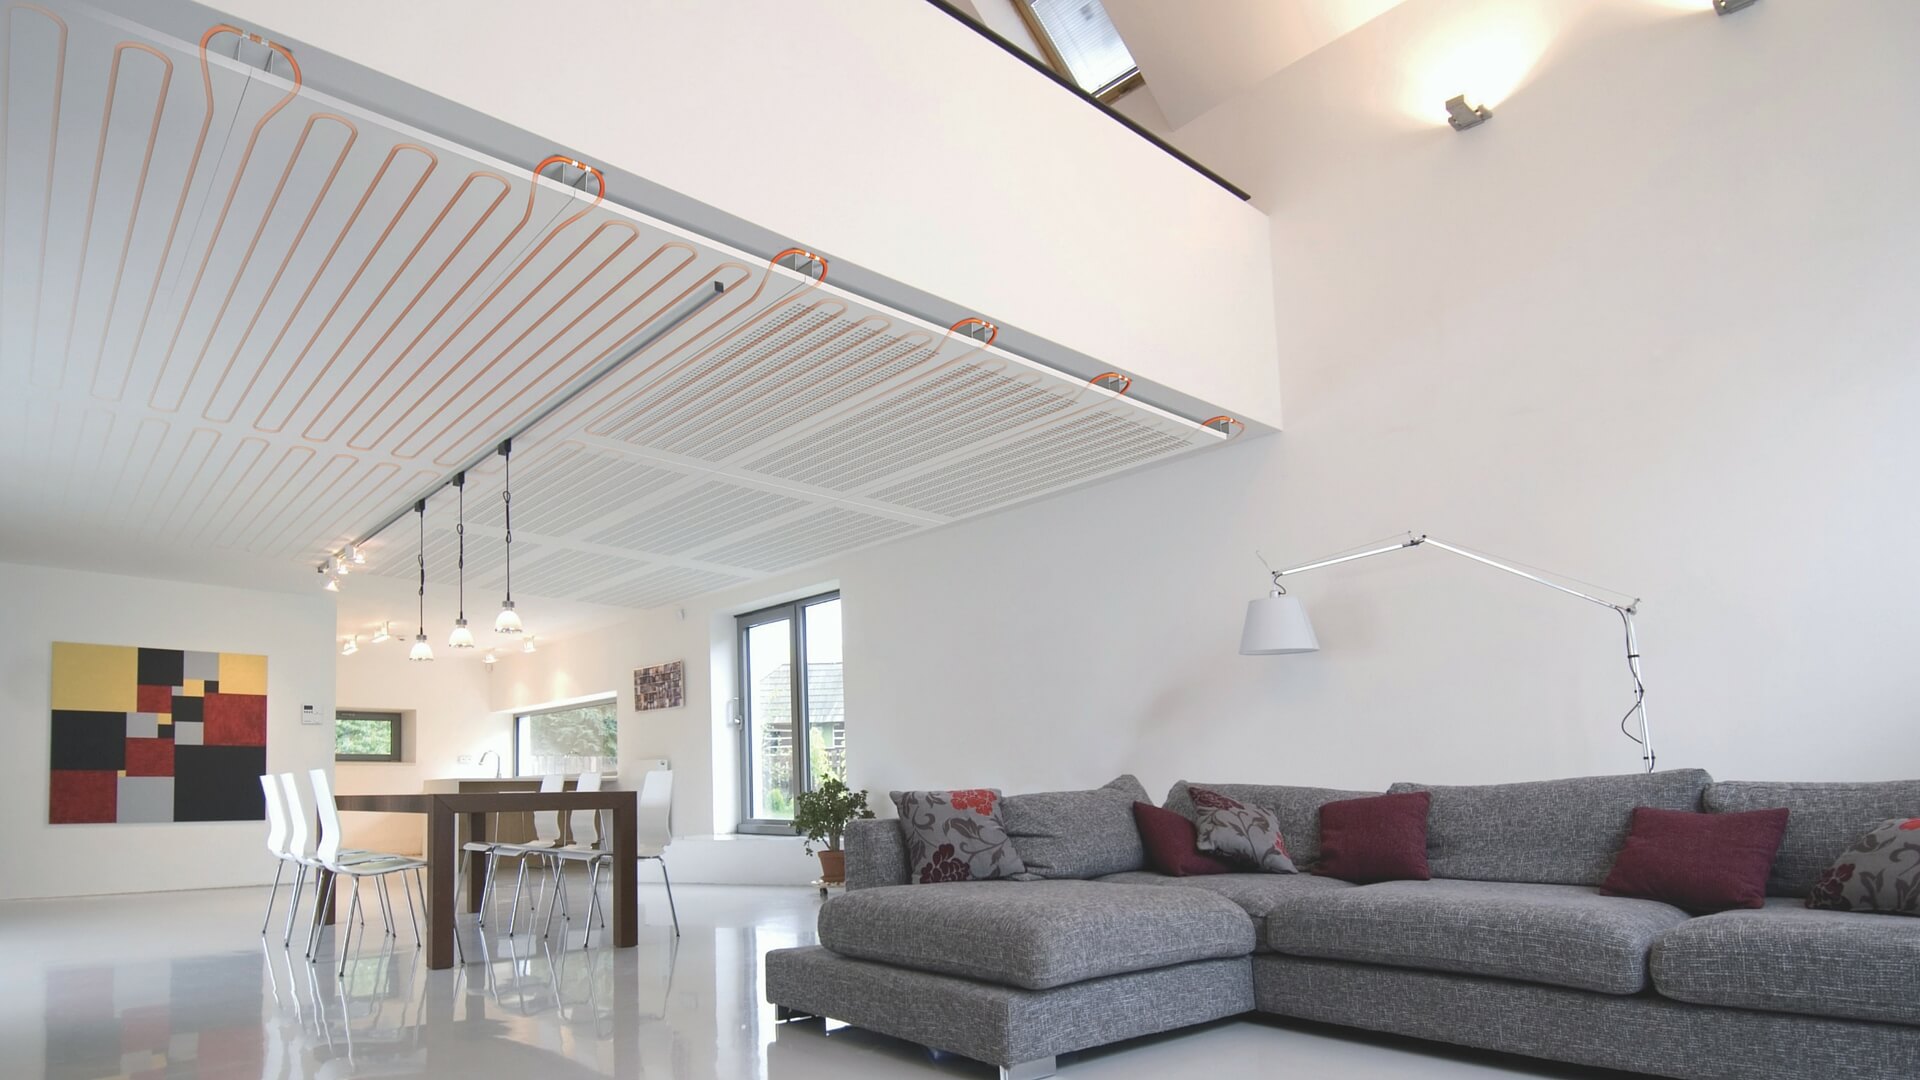 What You Should Know When Looking for Hydronic Heating Systems